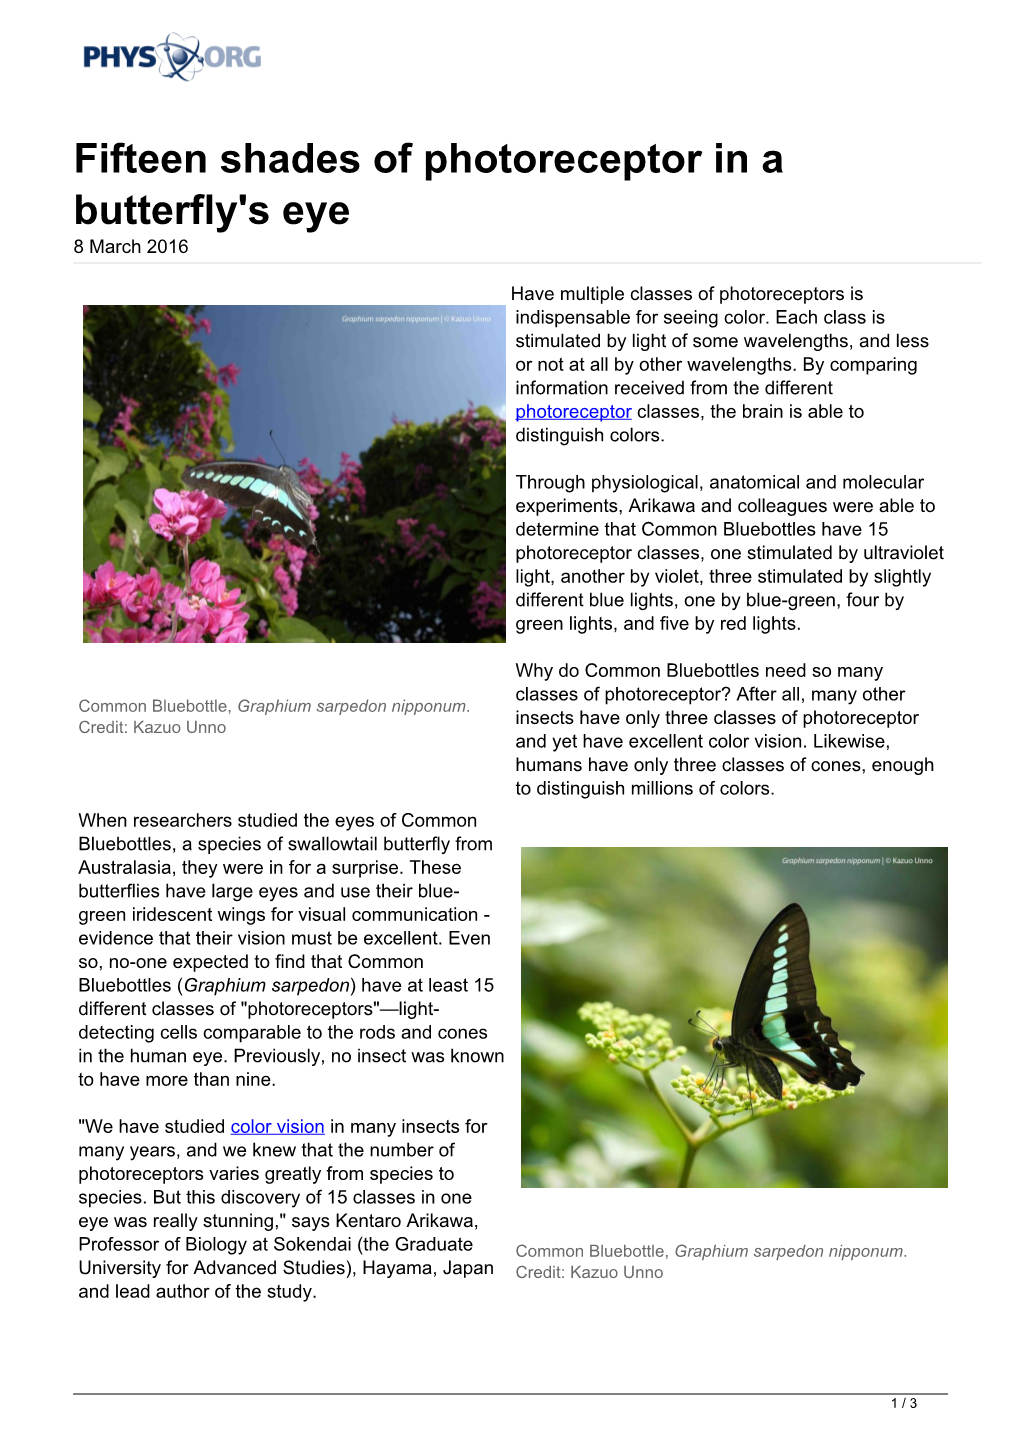 Fifteen Shades of Photoreceptor in a Butterfly's Eye 8 March 2016